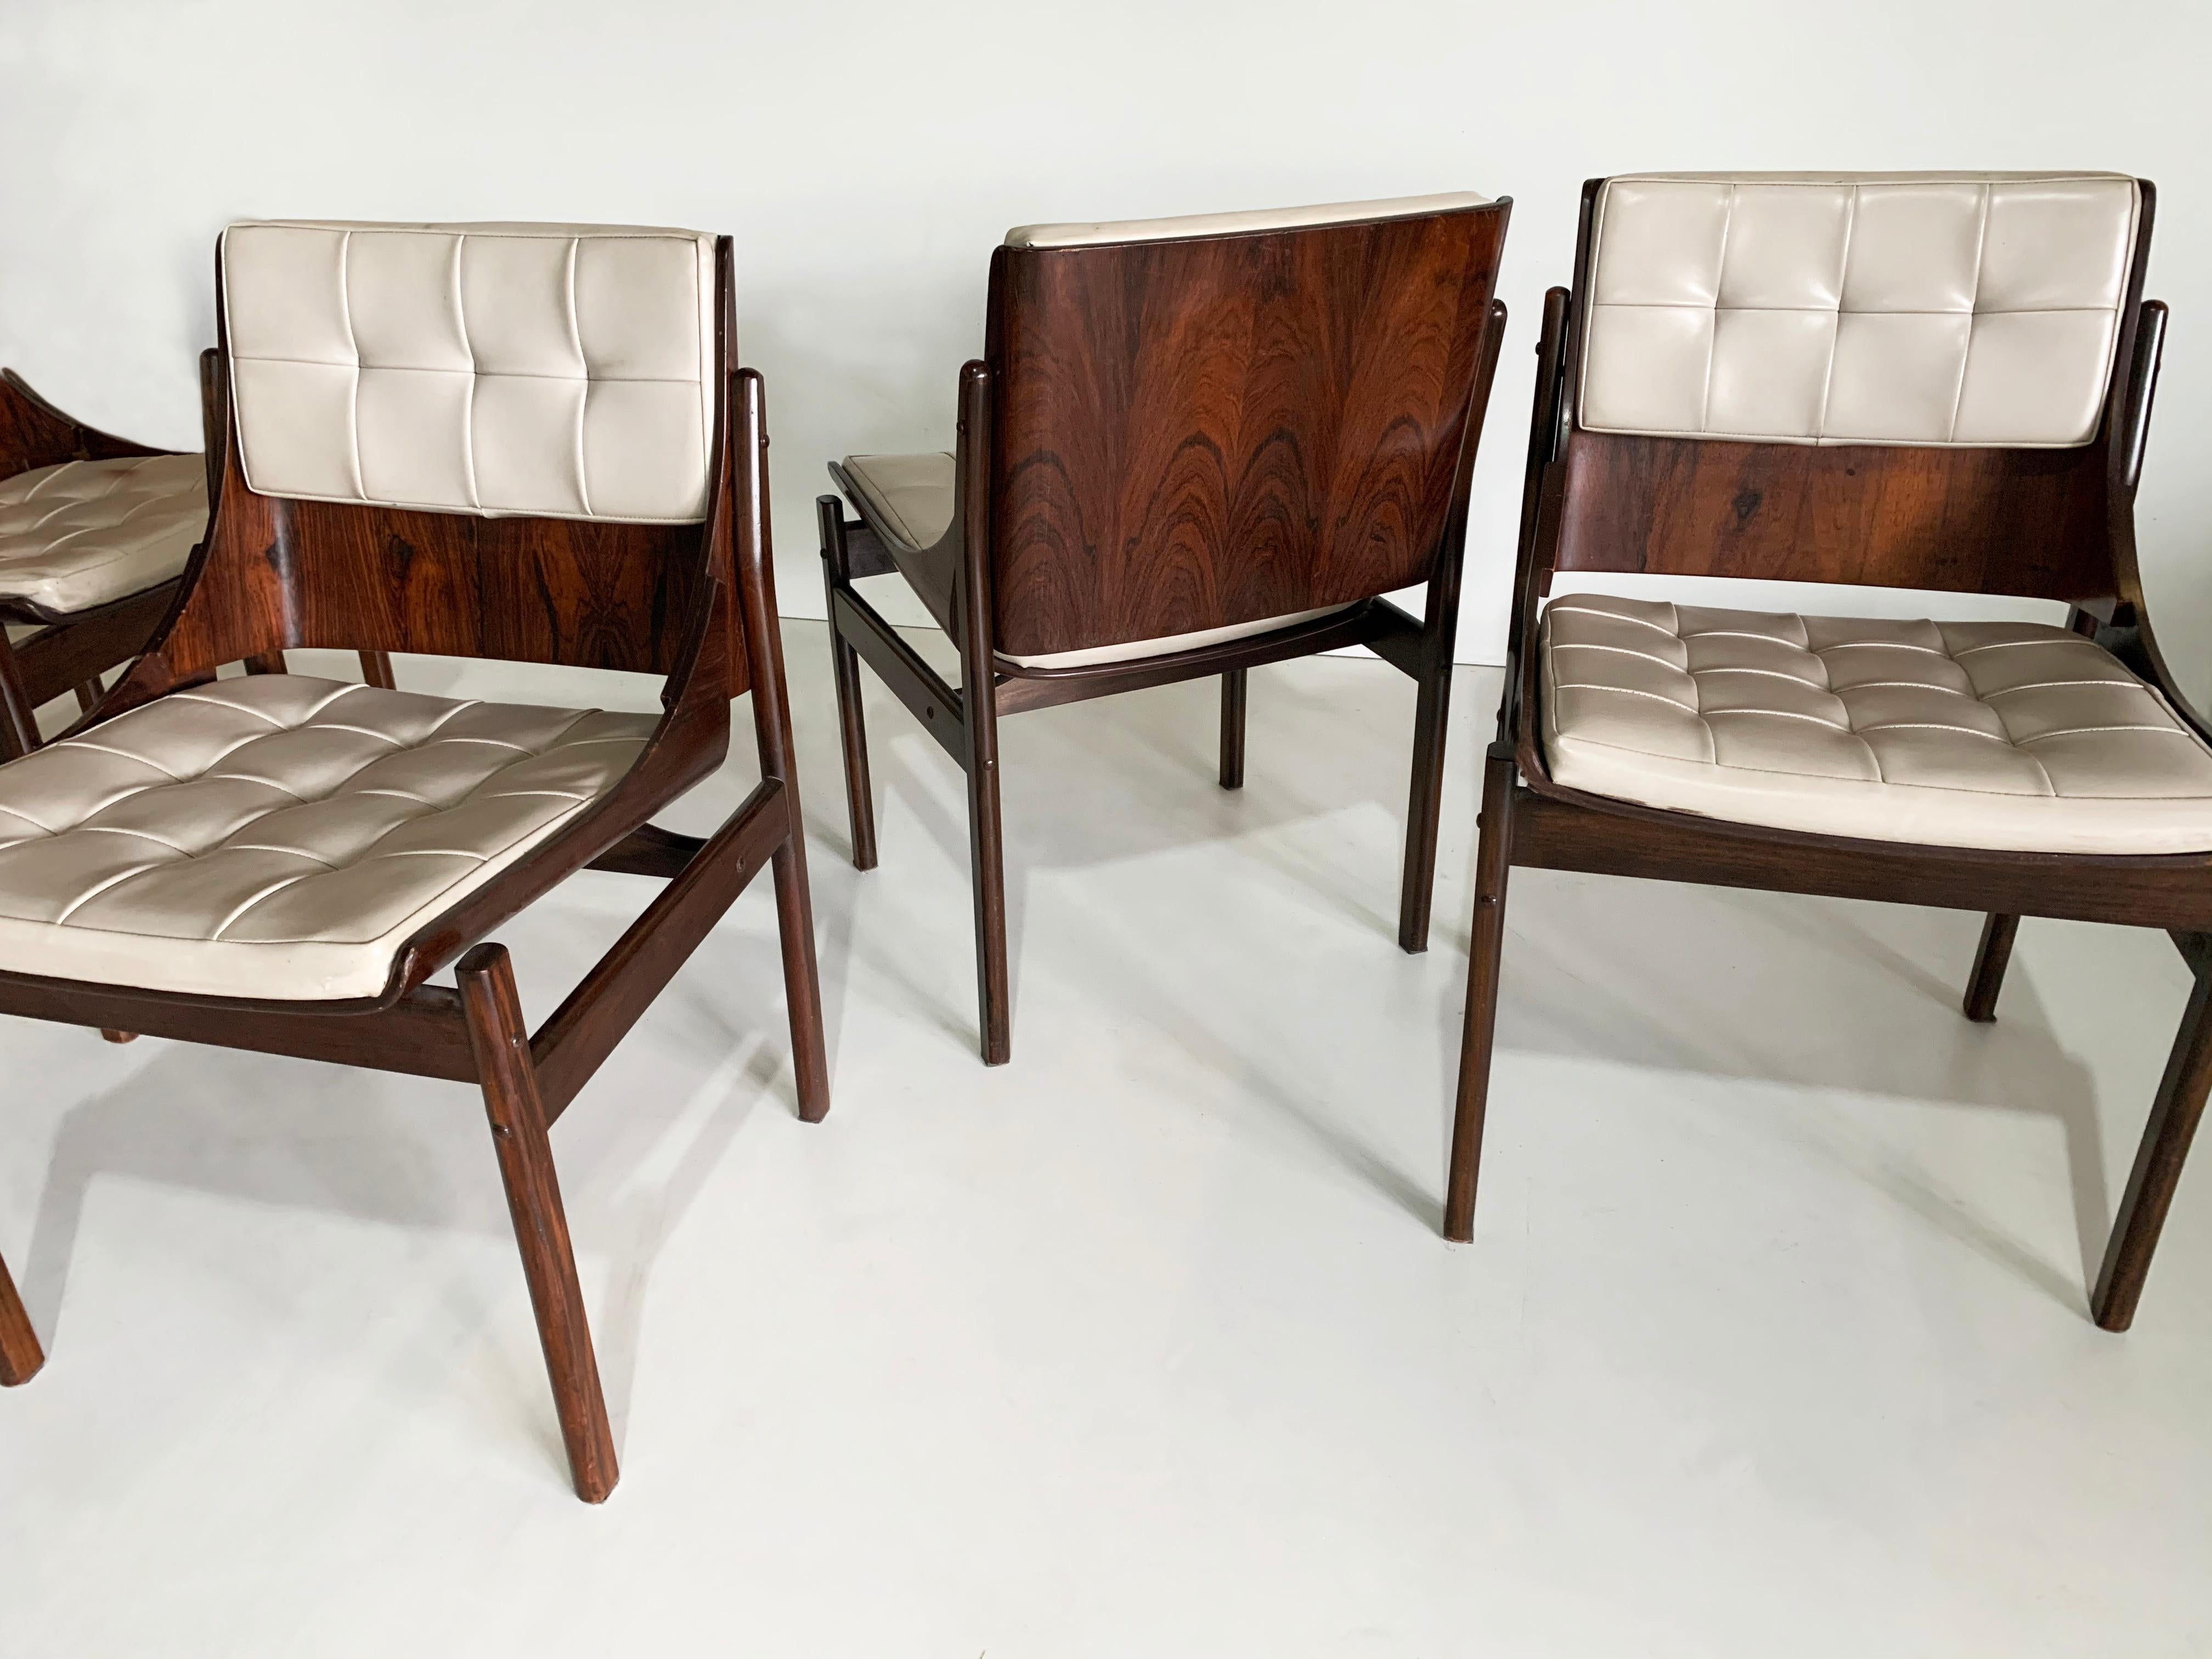 These chairs, often attributed to Jorge Zalszupin was produced in the 1960's by Moveis Novo Rumo, a furniture manufacture founded by Francesco Scapinelli, Giuseppe Scapinelli's brother. The design of these chairs resemble Zalszupin's design due to